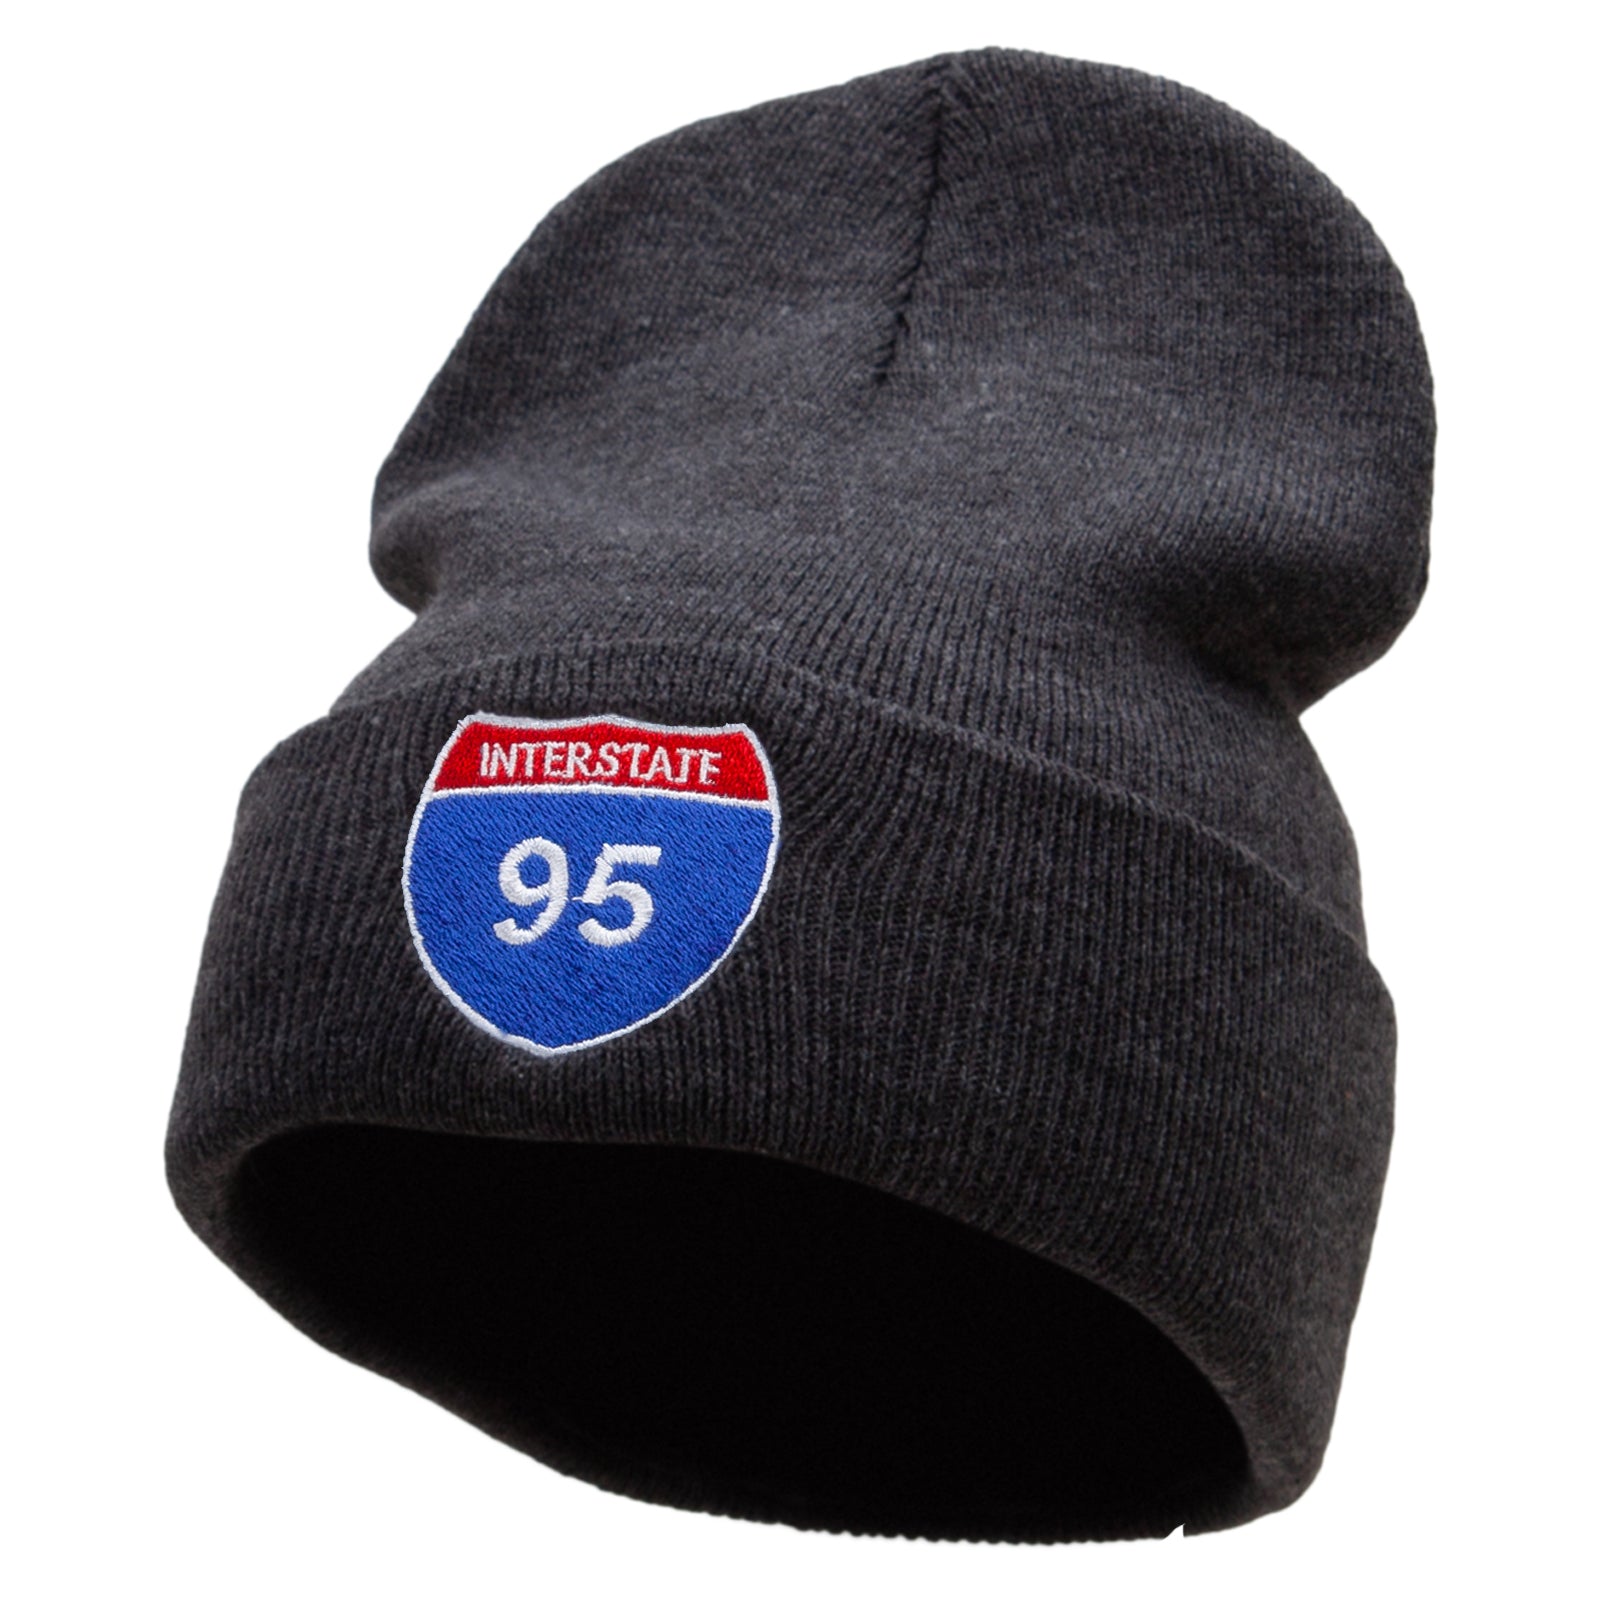 Interstate 95 Sign Embroidered 12 Inch Long Knitted Beanie - Heather Charcoal OSFM